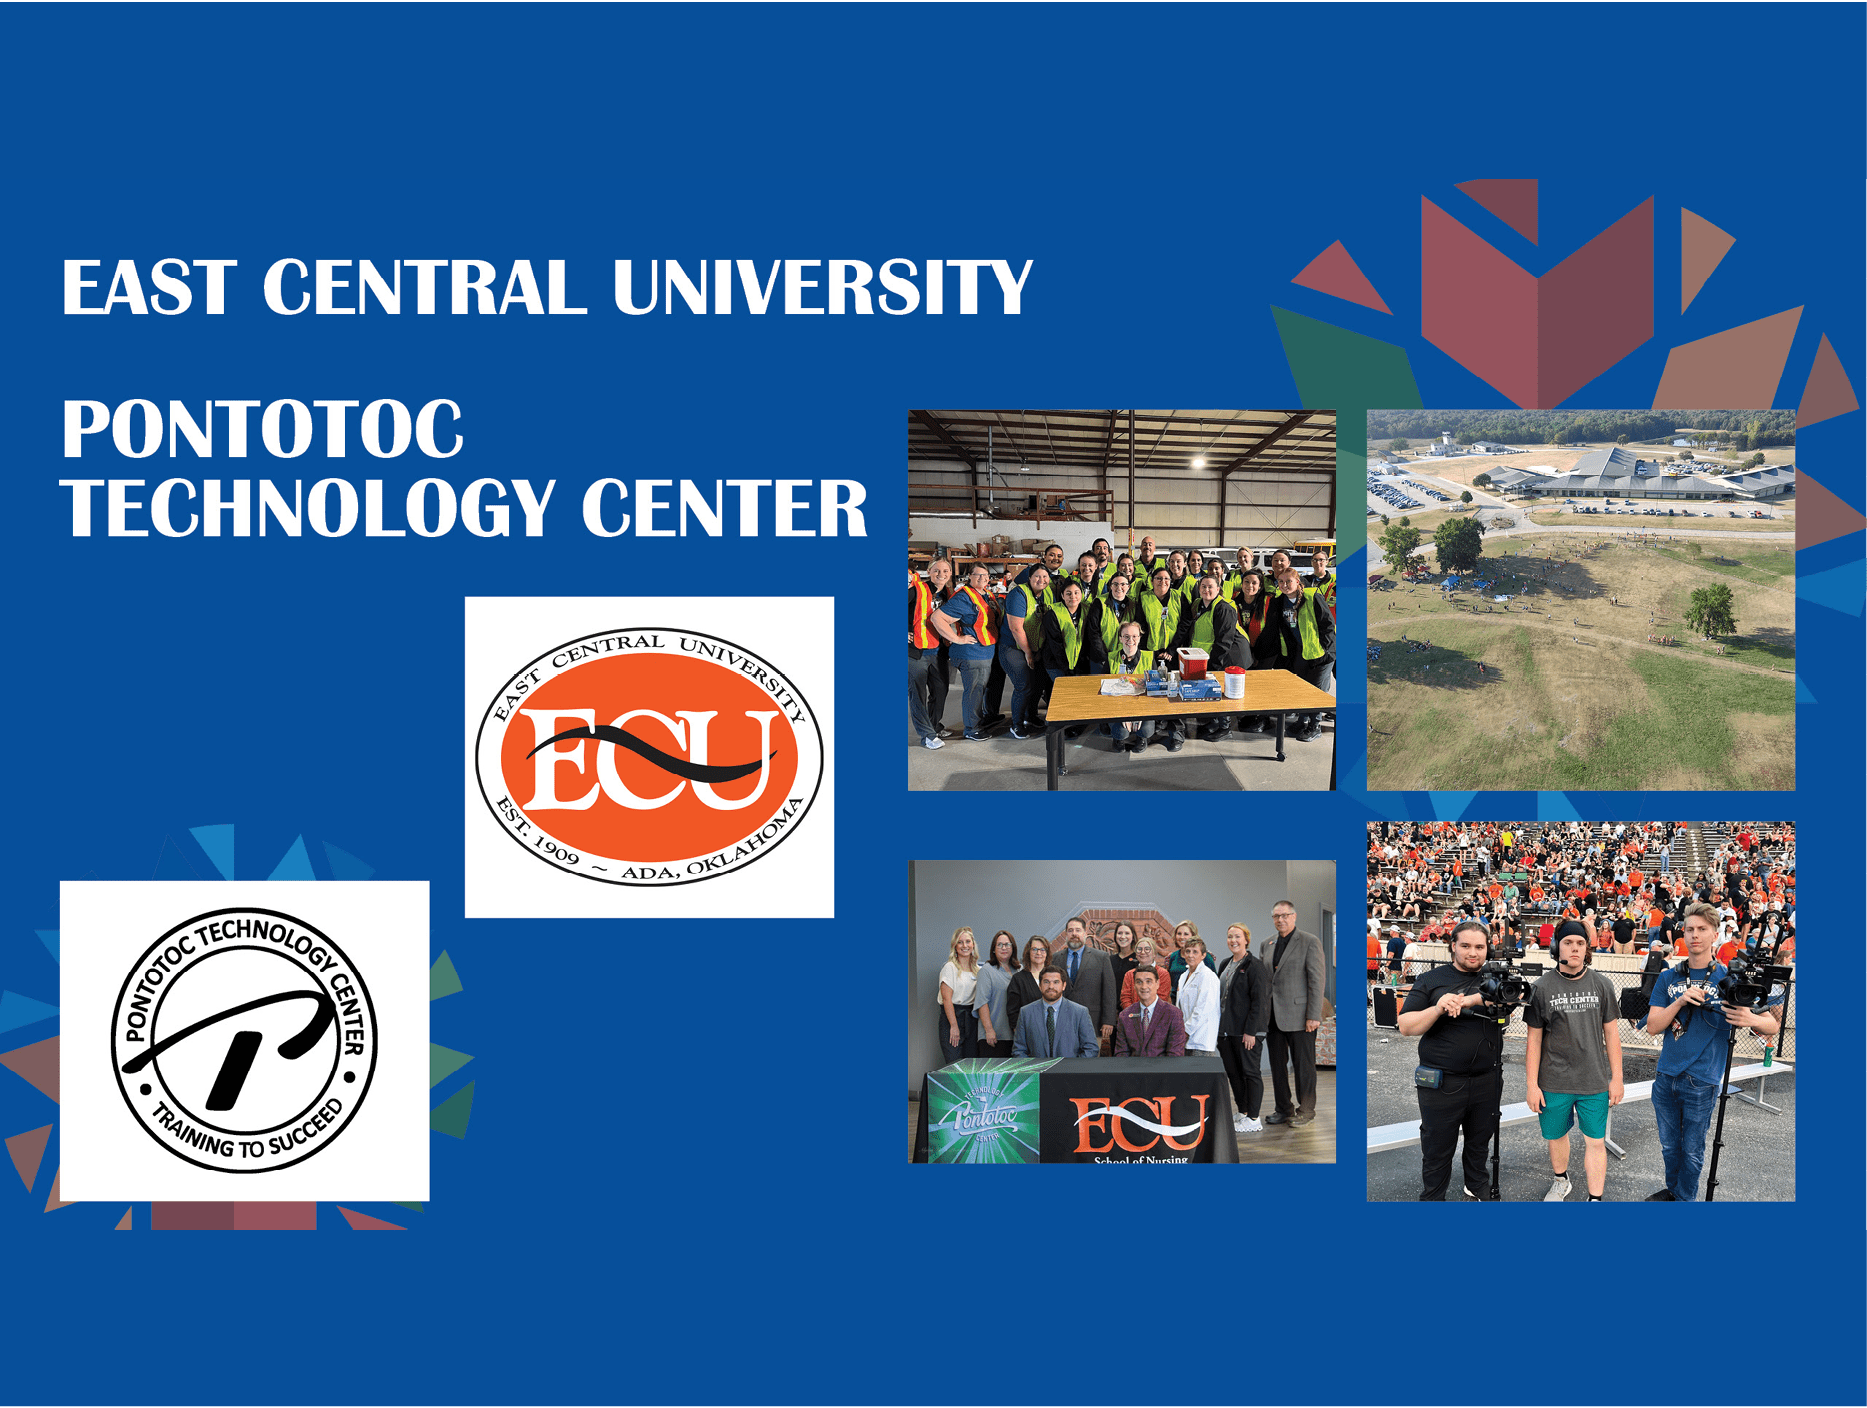 East Central University and Pontotoc Technology Center